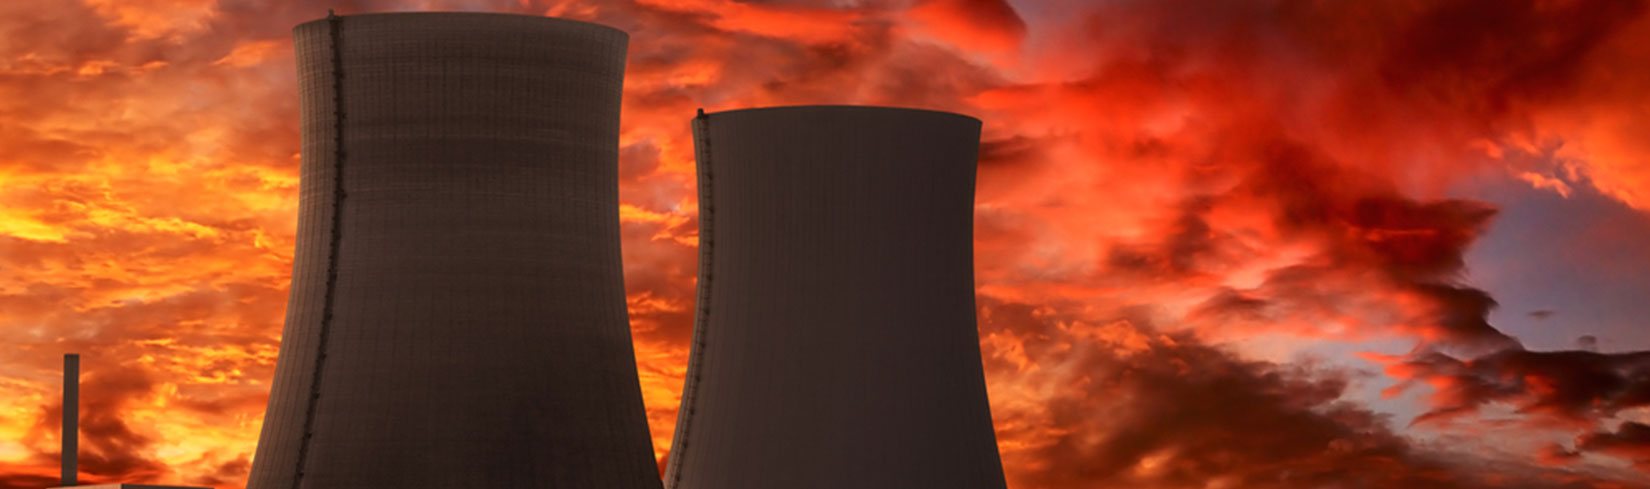 casting for nuclear power plant